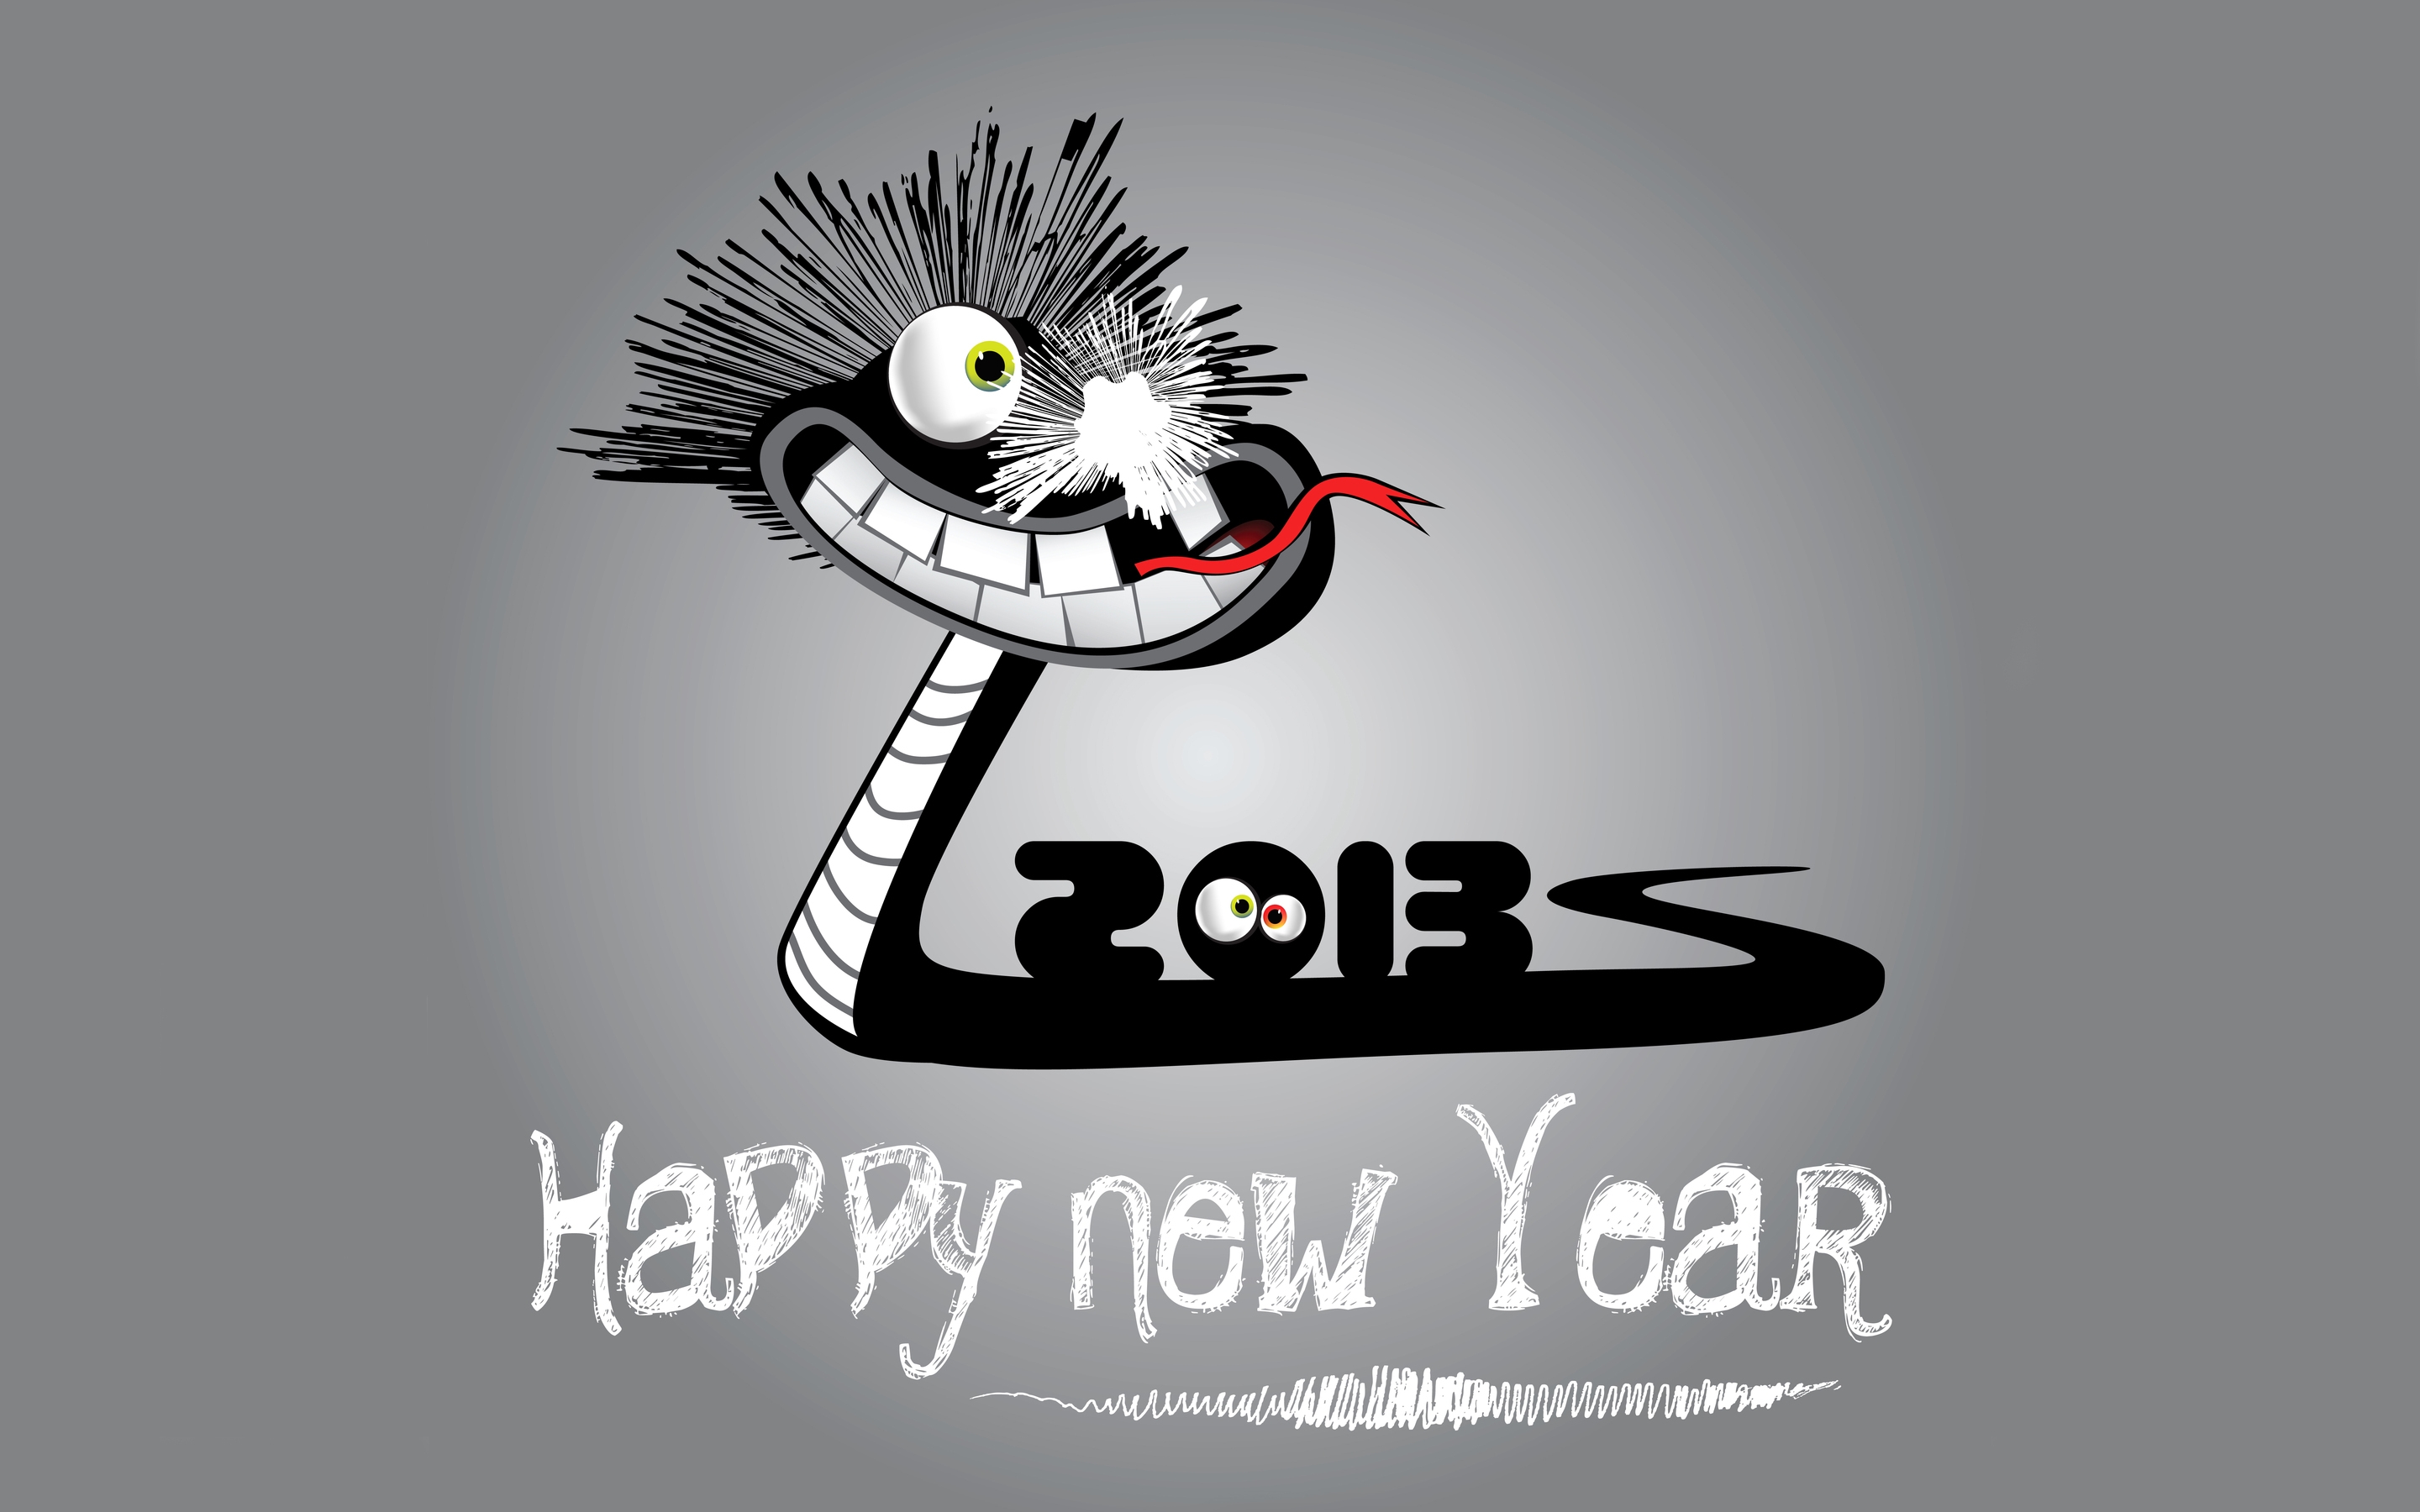 2013 Happy New Year for 2880 x 1800 Retina Display resolution